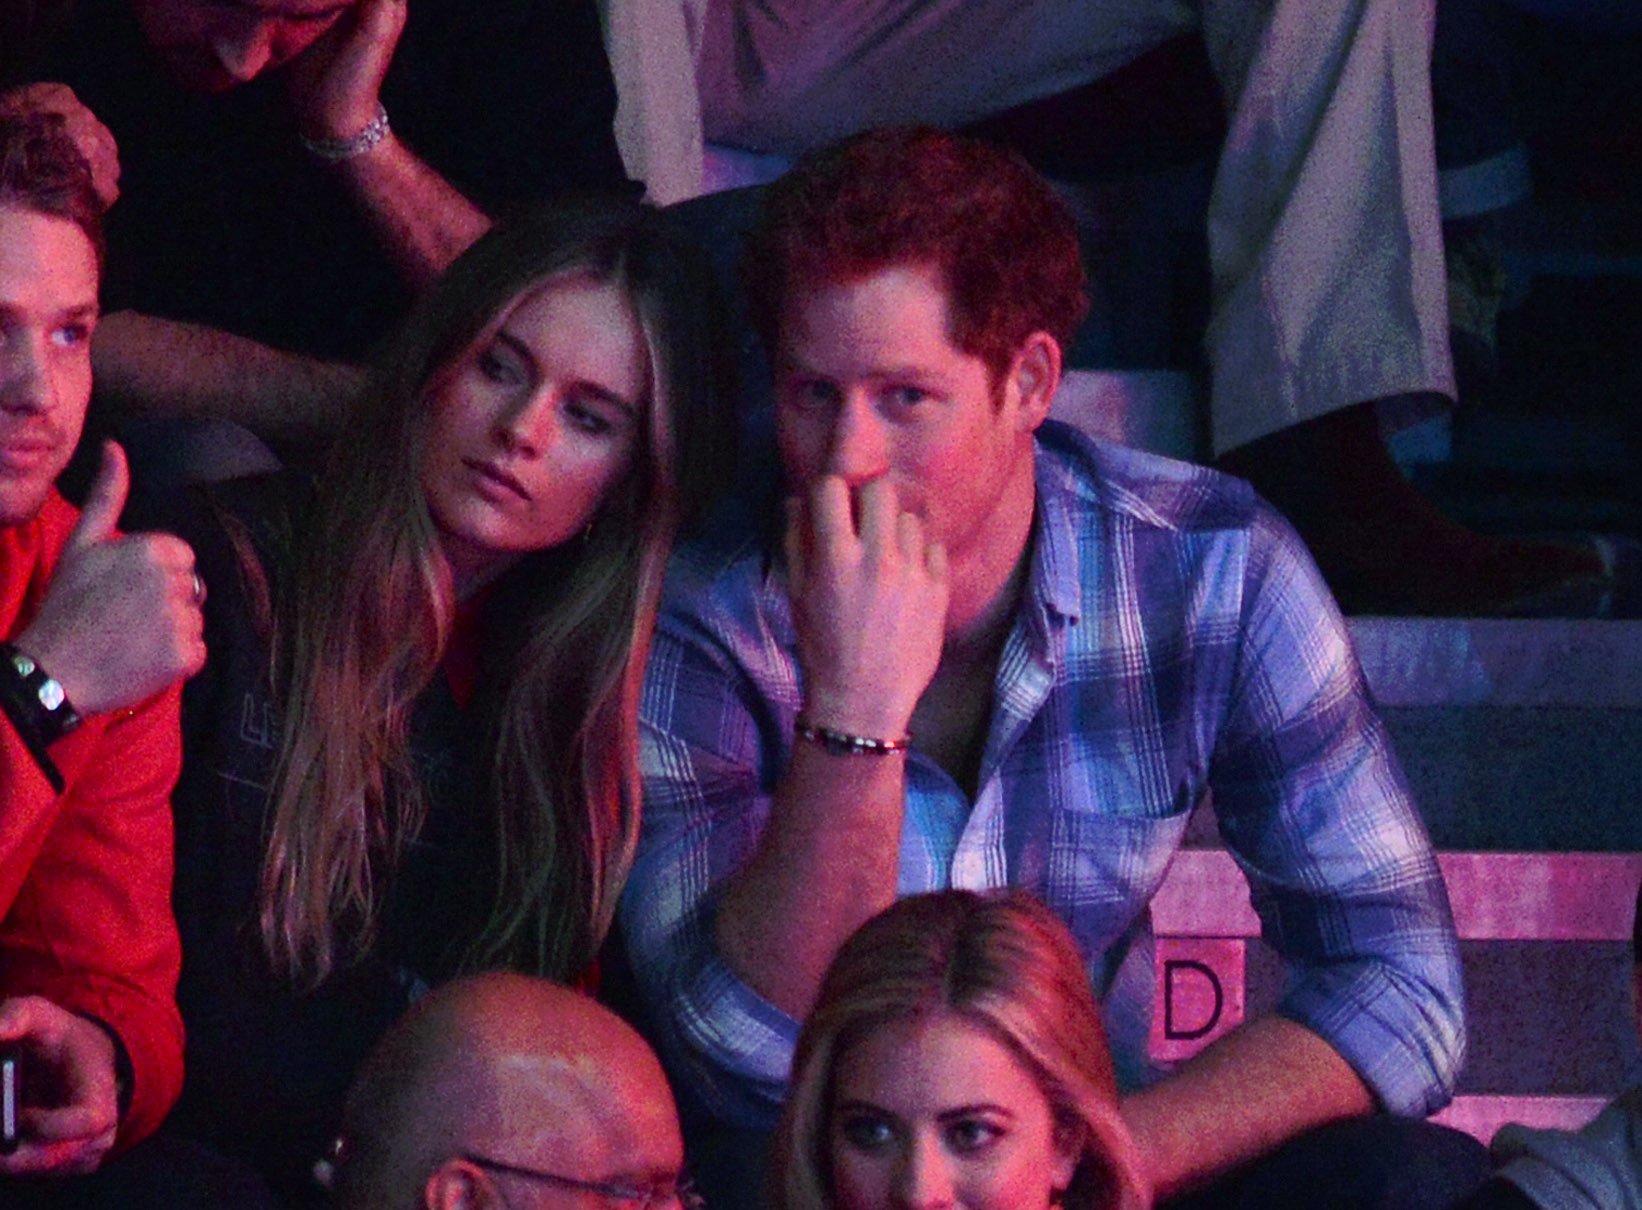 Prince Harry and Cressida Bonas at the We Day UK charity event on March 7, 2014  | Source: Getty Images